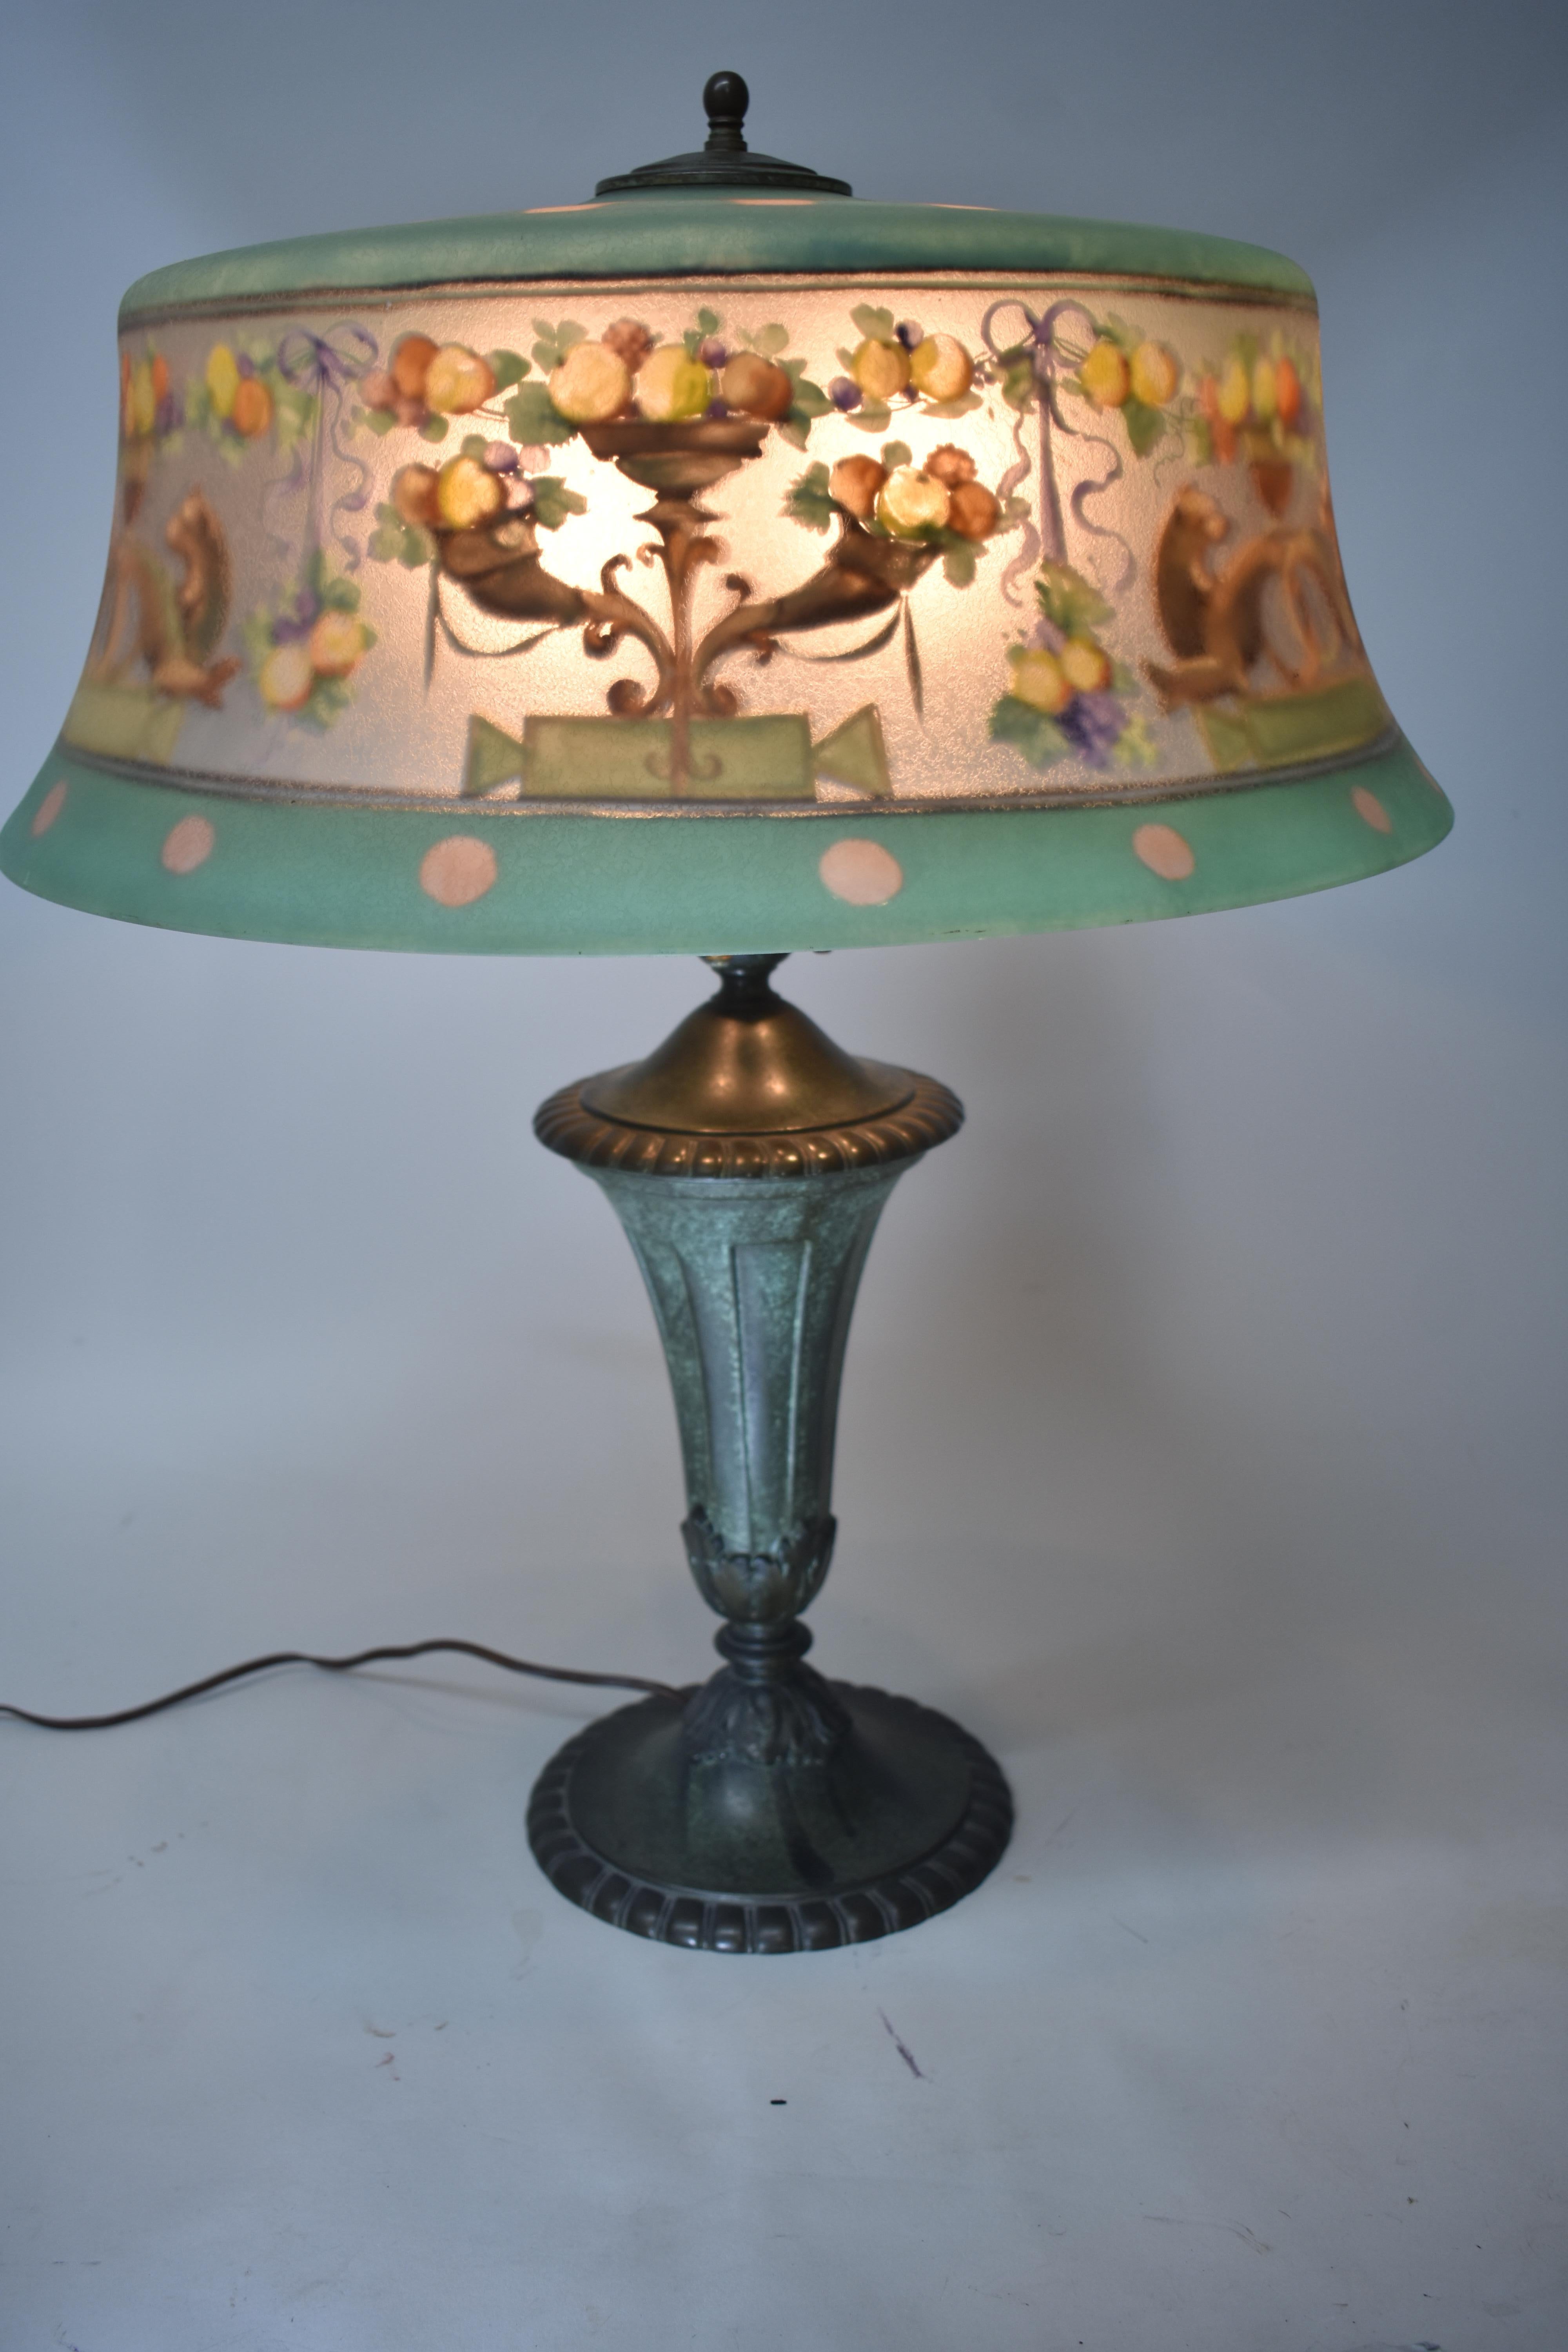 Glass Pairpoint Reverse Painted Table Lamp Exeter Shade #X27 Base 3042 Dragon & Fruit